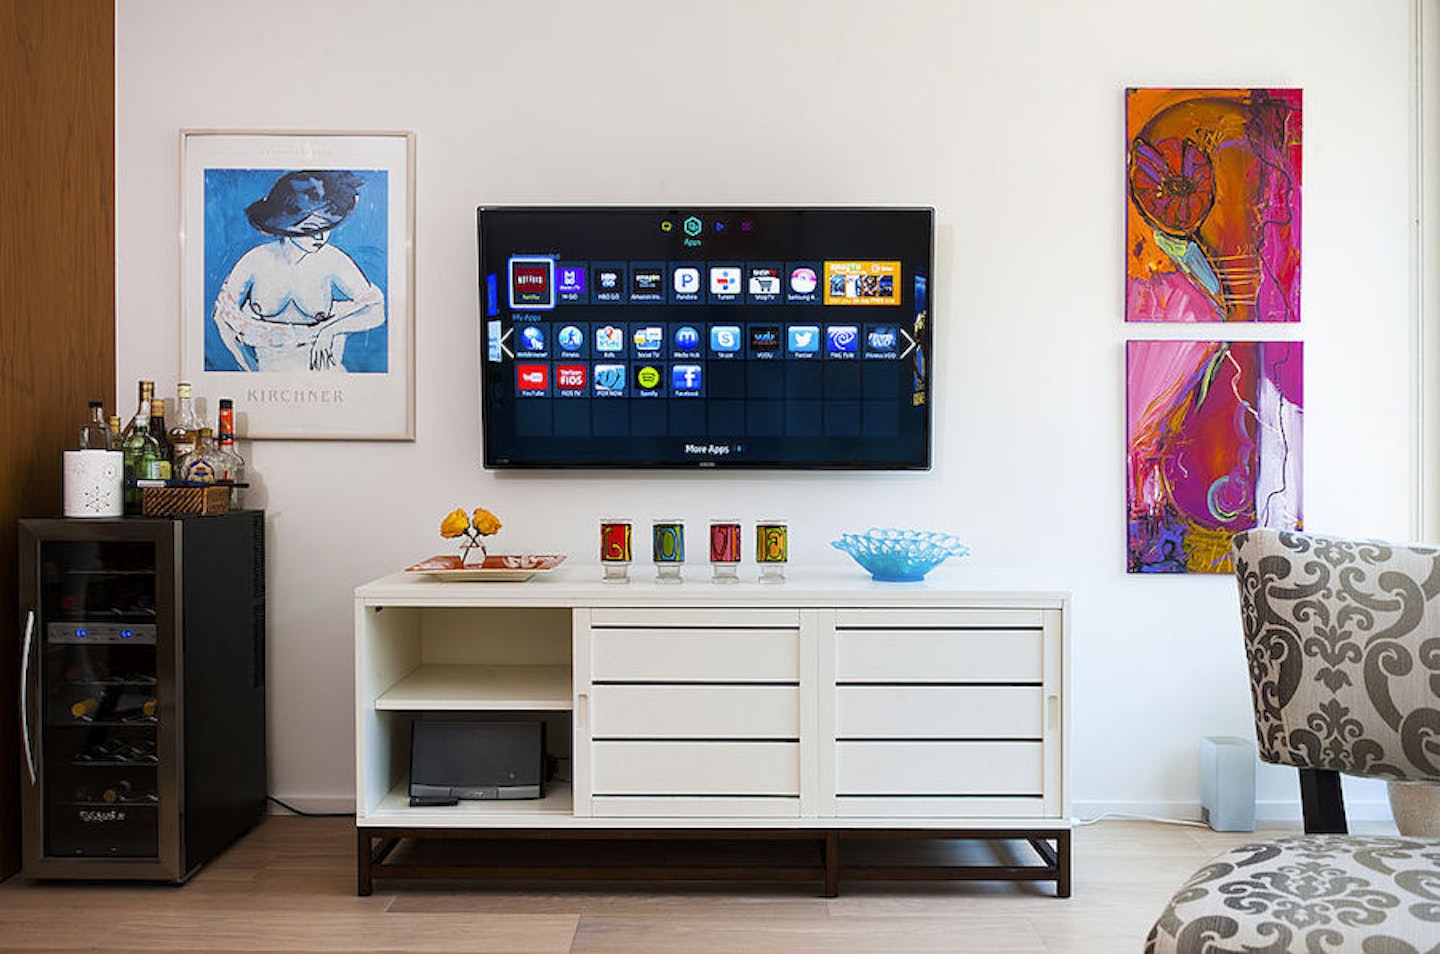 TV wall mounted using wireless internet connection